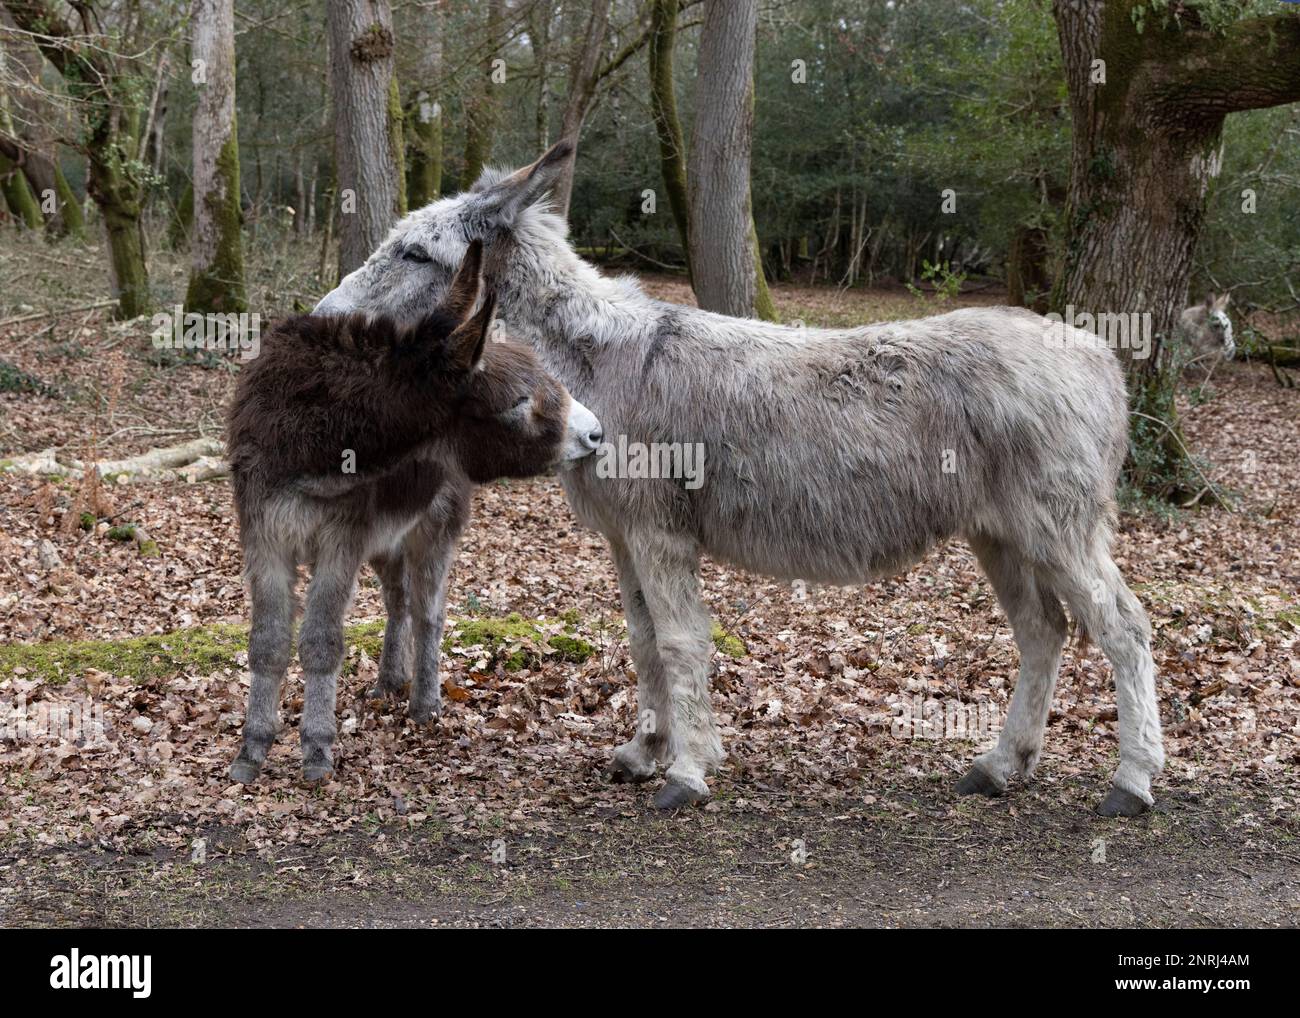 Two donkeys nuzzle each other in New Forest woodland Stock Photo